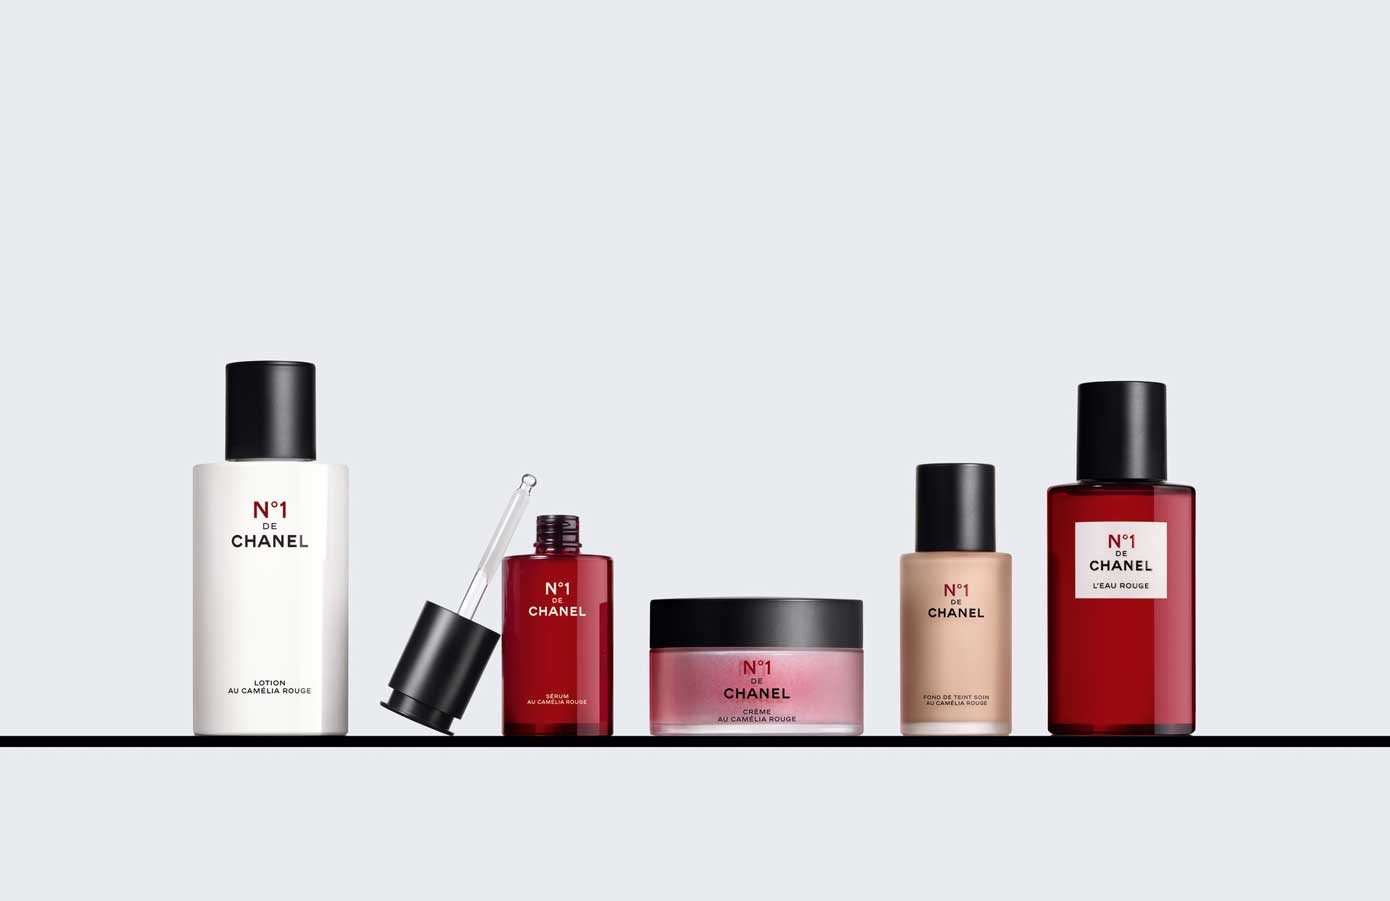 N°1 de Chanel Offers A New Take On Your Entire Beauty Routine